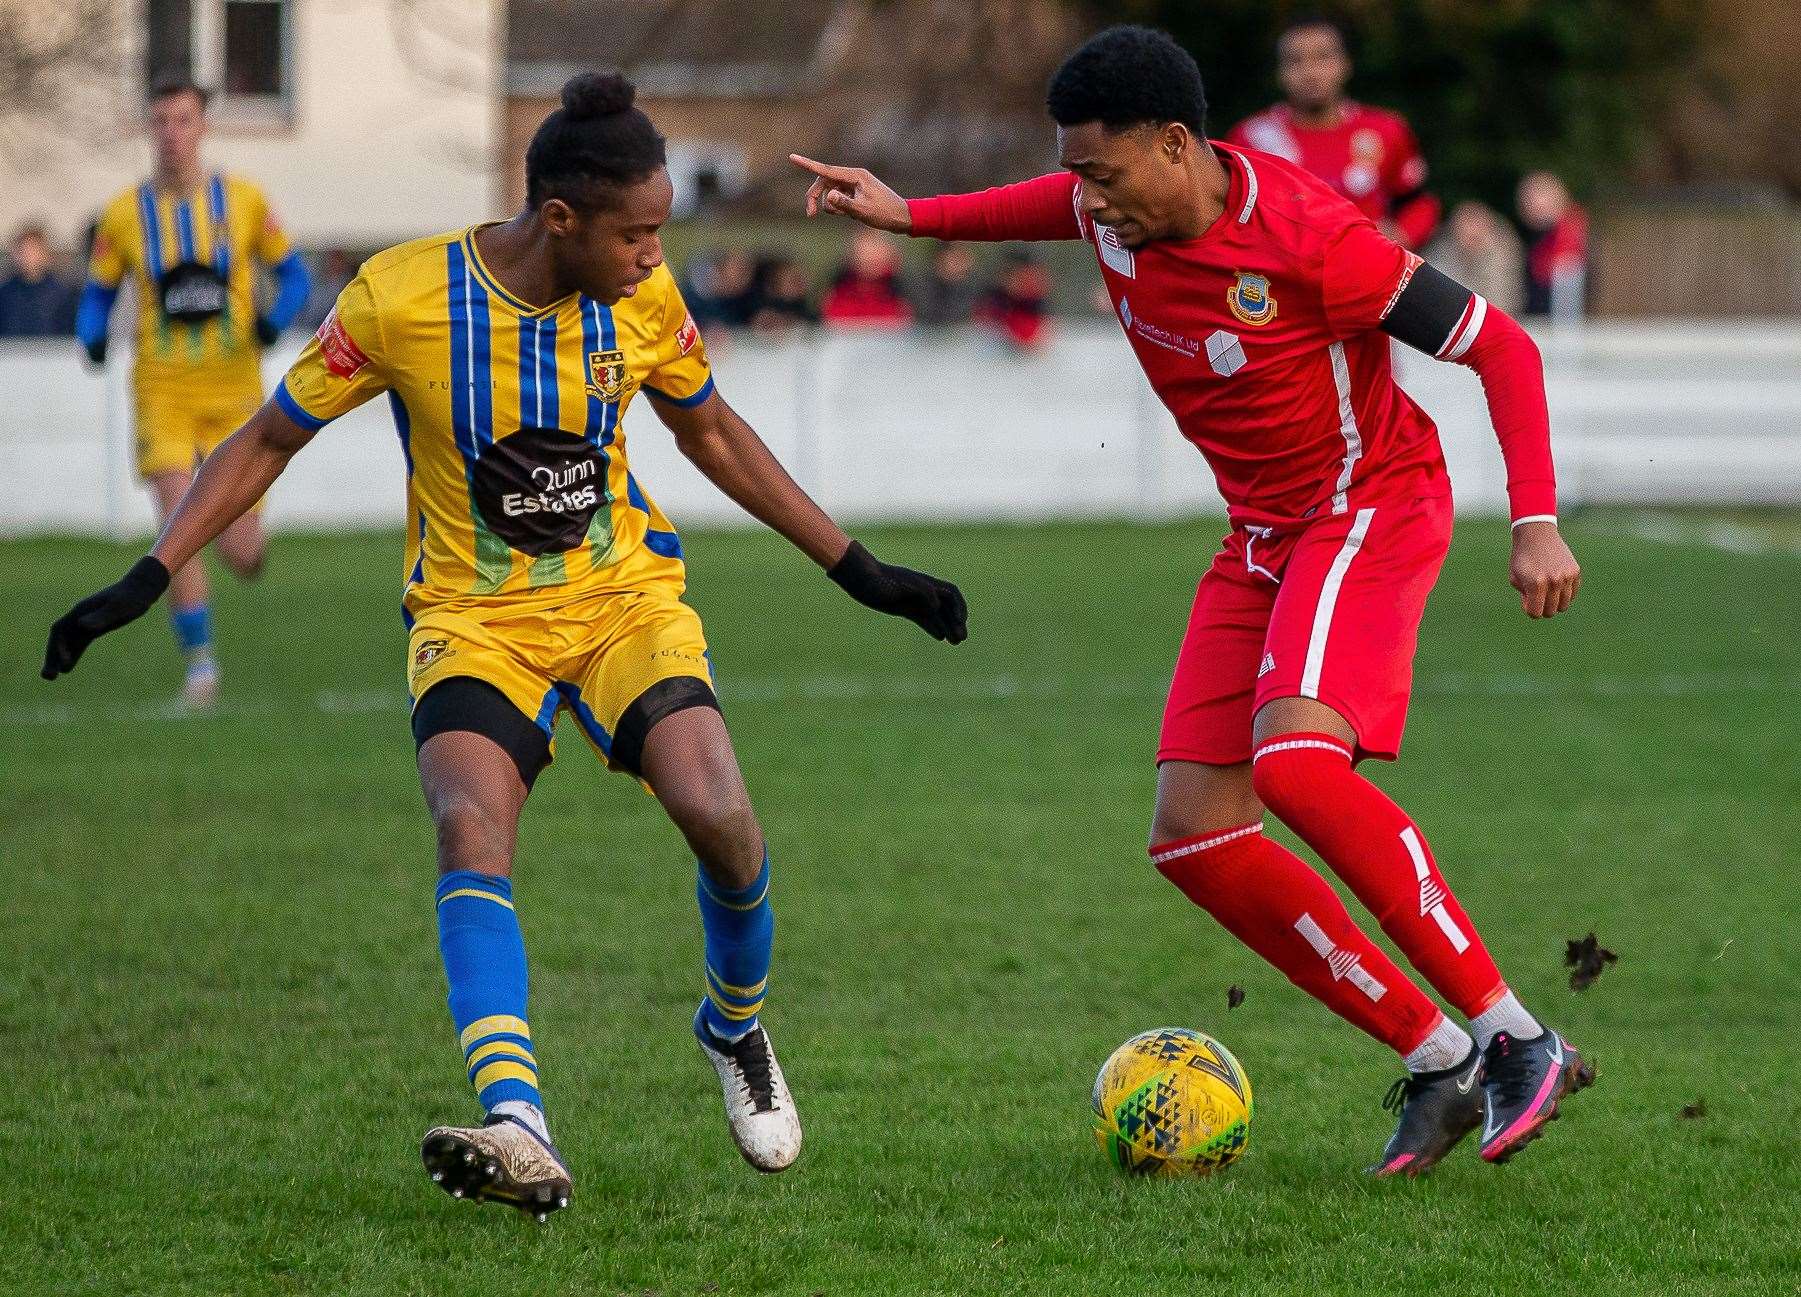 Whitstable's Stephen Okoh cuts inside. Picture: Les Biggs